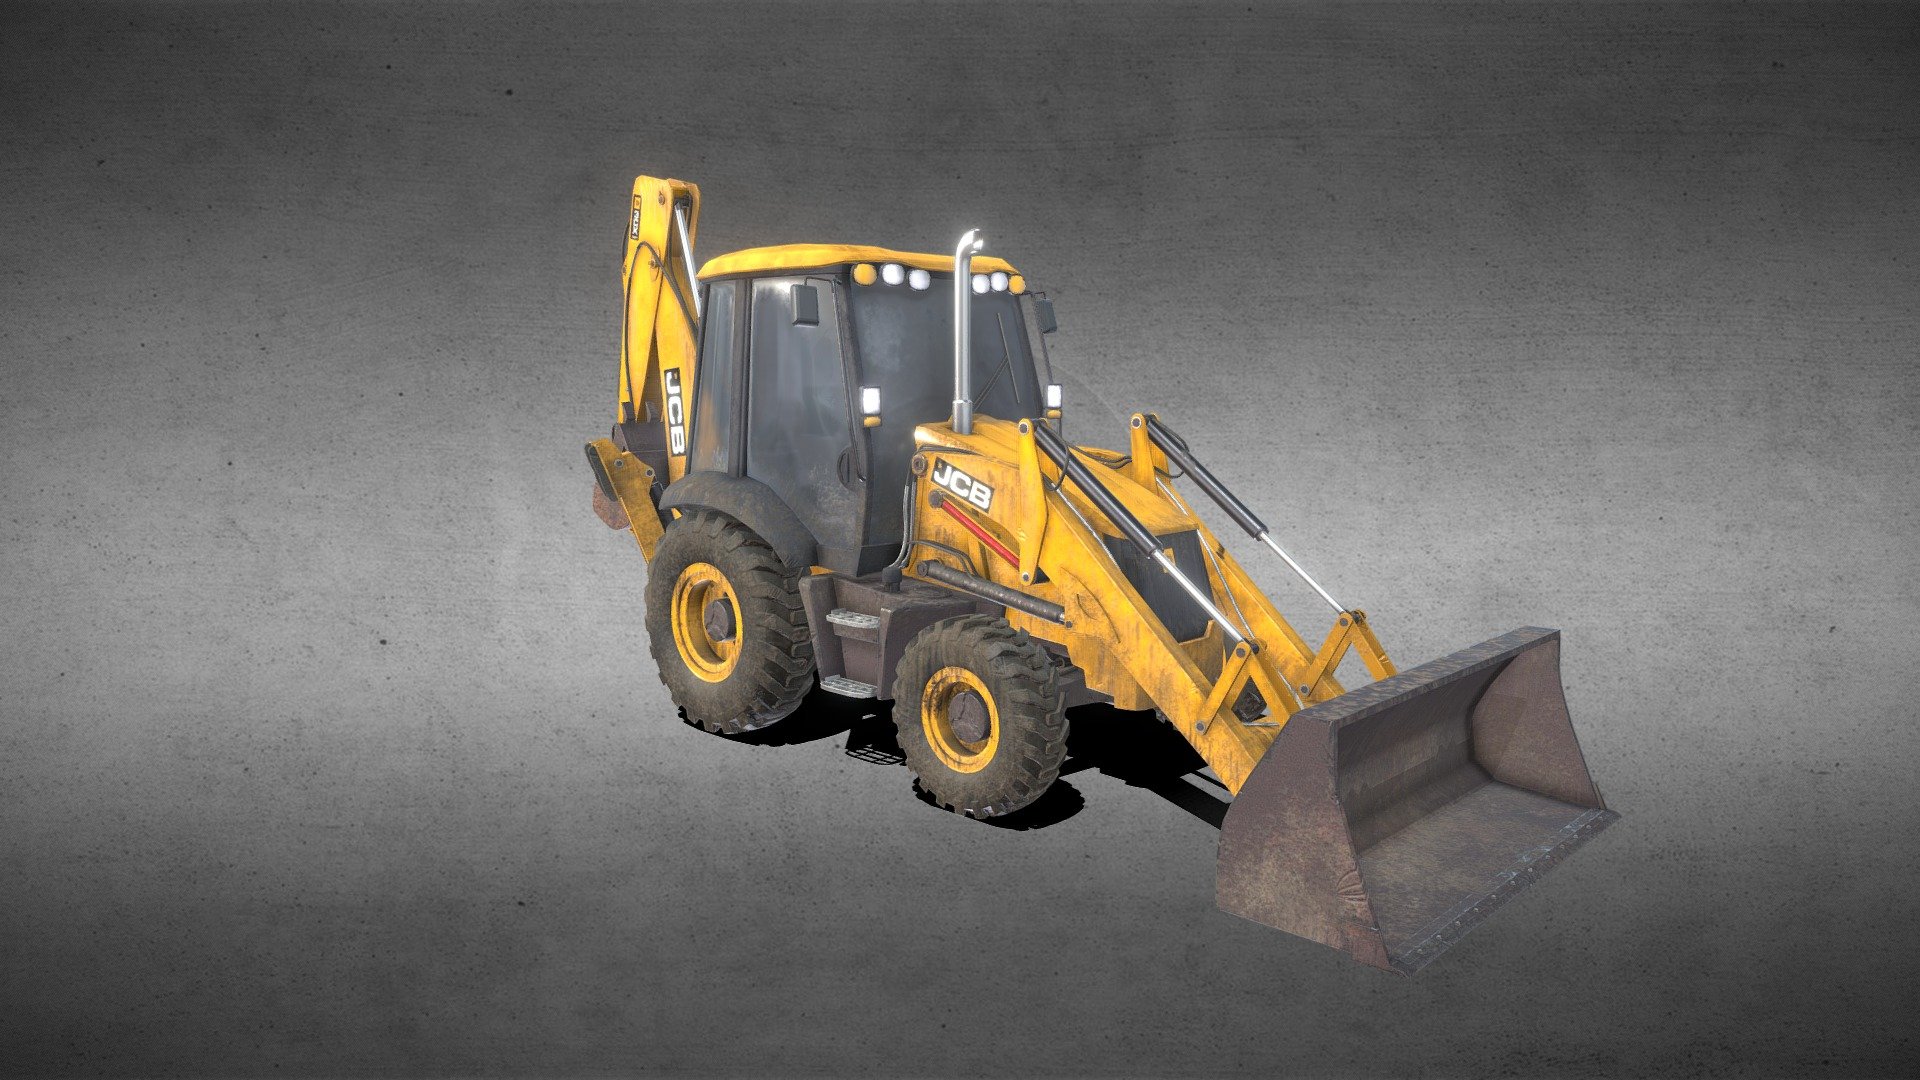 Final Project for my Intro to 3D Modeling class. Constructive feedback is welcome! - JCB Backhoe Loader 3CX Tractor - Download Free 3D model by Kyle Burton (@chimeracreations) 3d model